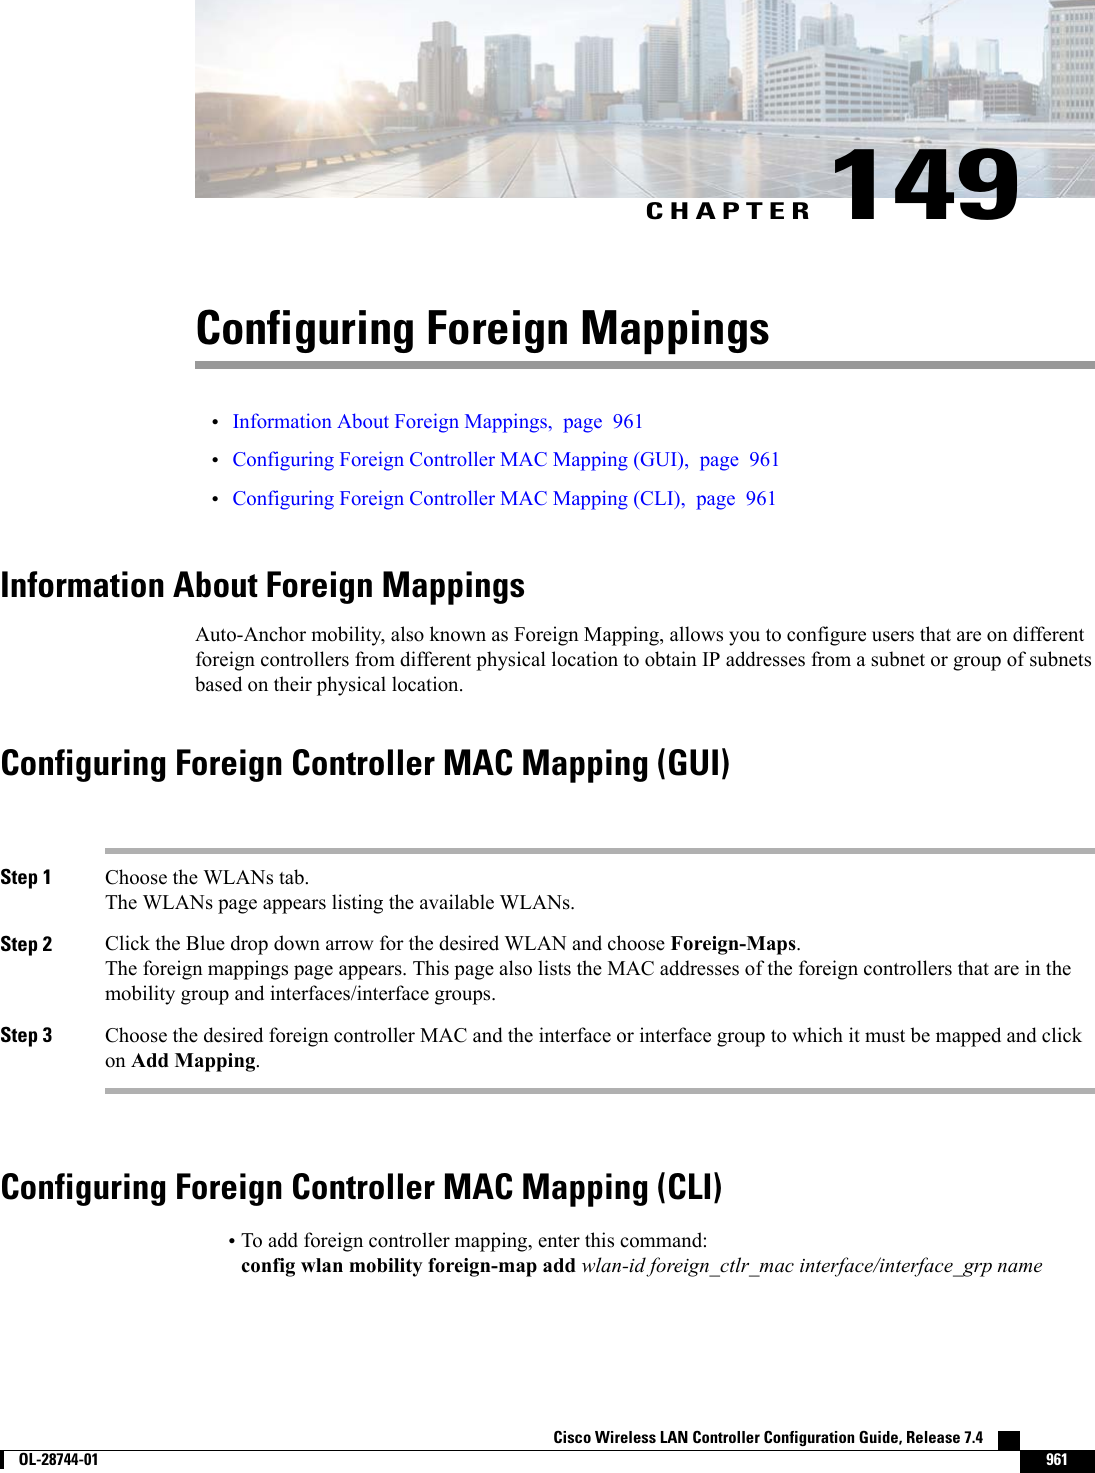 CHAPTER 149Configuring Foreign Mappings•Information About Foreign Mappings, page 961•Configuring Foreign Controller MAC Mapping (GUI), page 961•Configuring Foreign Controller MAC Mapping (CLI), page 961Information About Foreign MappingsAuto-Anchor mobility, also known as Foreign Mapping, allows you to configure users that are on differentforeign controllers from different physical location to obtain IP addresses from a subnet or group of subnetsbased on their physical location.Configuring Foreign Controller MAC Mapping (GUI)Step 1 Choose the WLANs tab.The WLANs page appears listing the available WLANs.Step 2 Click the Blue drop down arrow for the desired WLAN and choose Foreign-Maps.The foreign mappings page appears. This page also lists the MAC addresses of the foreign controllers that are in themobility group and interfaces/interface groups.Step 3 Choose the desired foreign controller MAC and the interface or interface group to which it must be mapped and clickon Add Mapping.Configuring Foreign Controller MAC Mapping (CLI)•To add foreign controller mapping, enter this command:config wlan mobility foreign-map add wlan-id foreign_ctlr_mac interface/interface_grp nameCisco Wireless LAN Controller Configuration Guide, Release 7.4        OL-28744-01 961